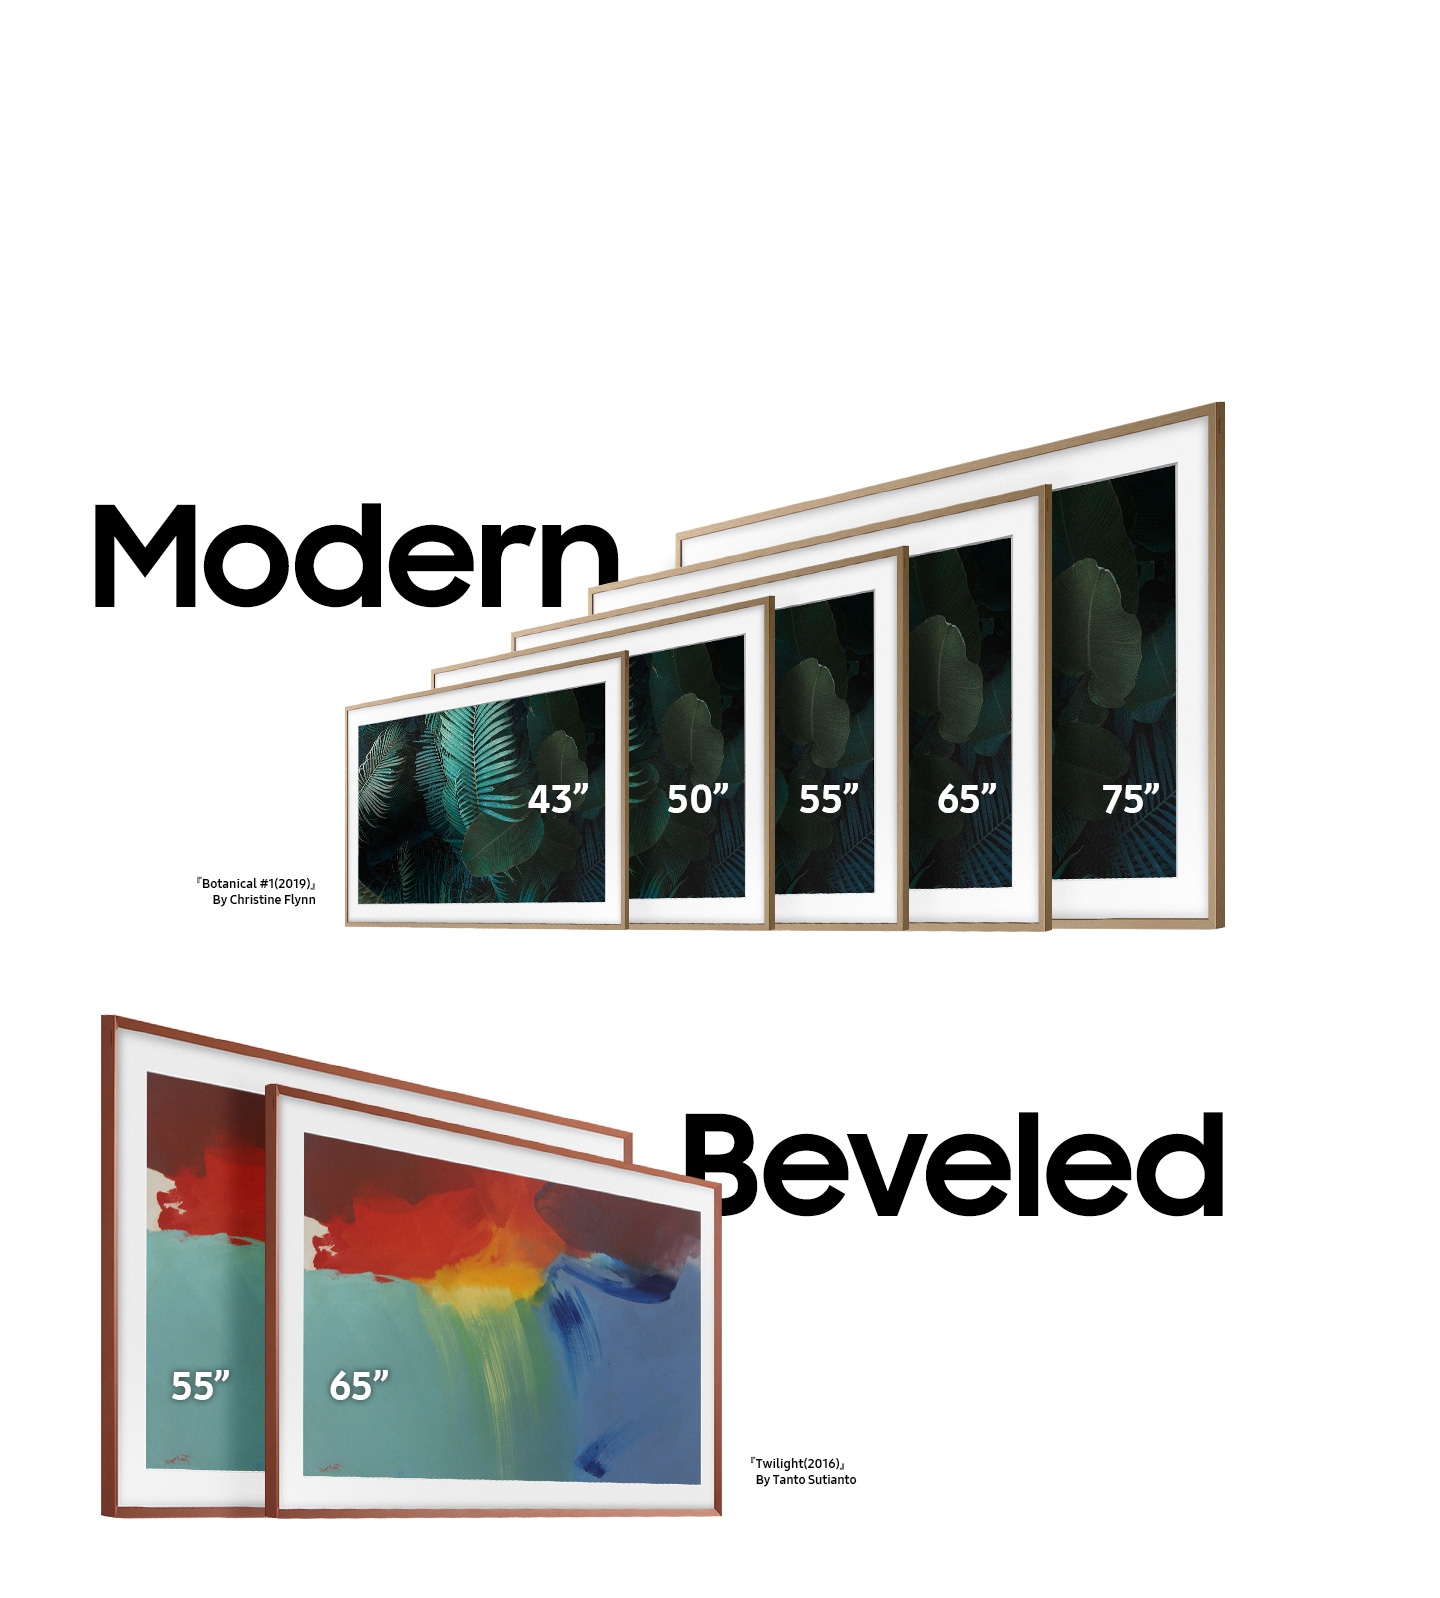 Modern type bezels are compatible with 43, 50, 55, 65, and 75-inch TVs, while Beveled type fit 55 and 65-inch TVs